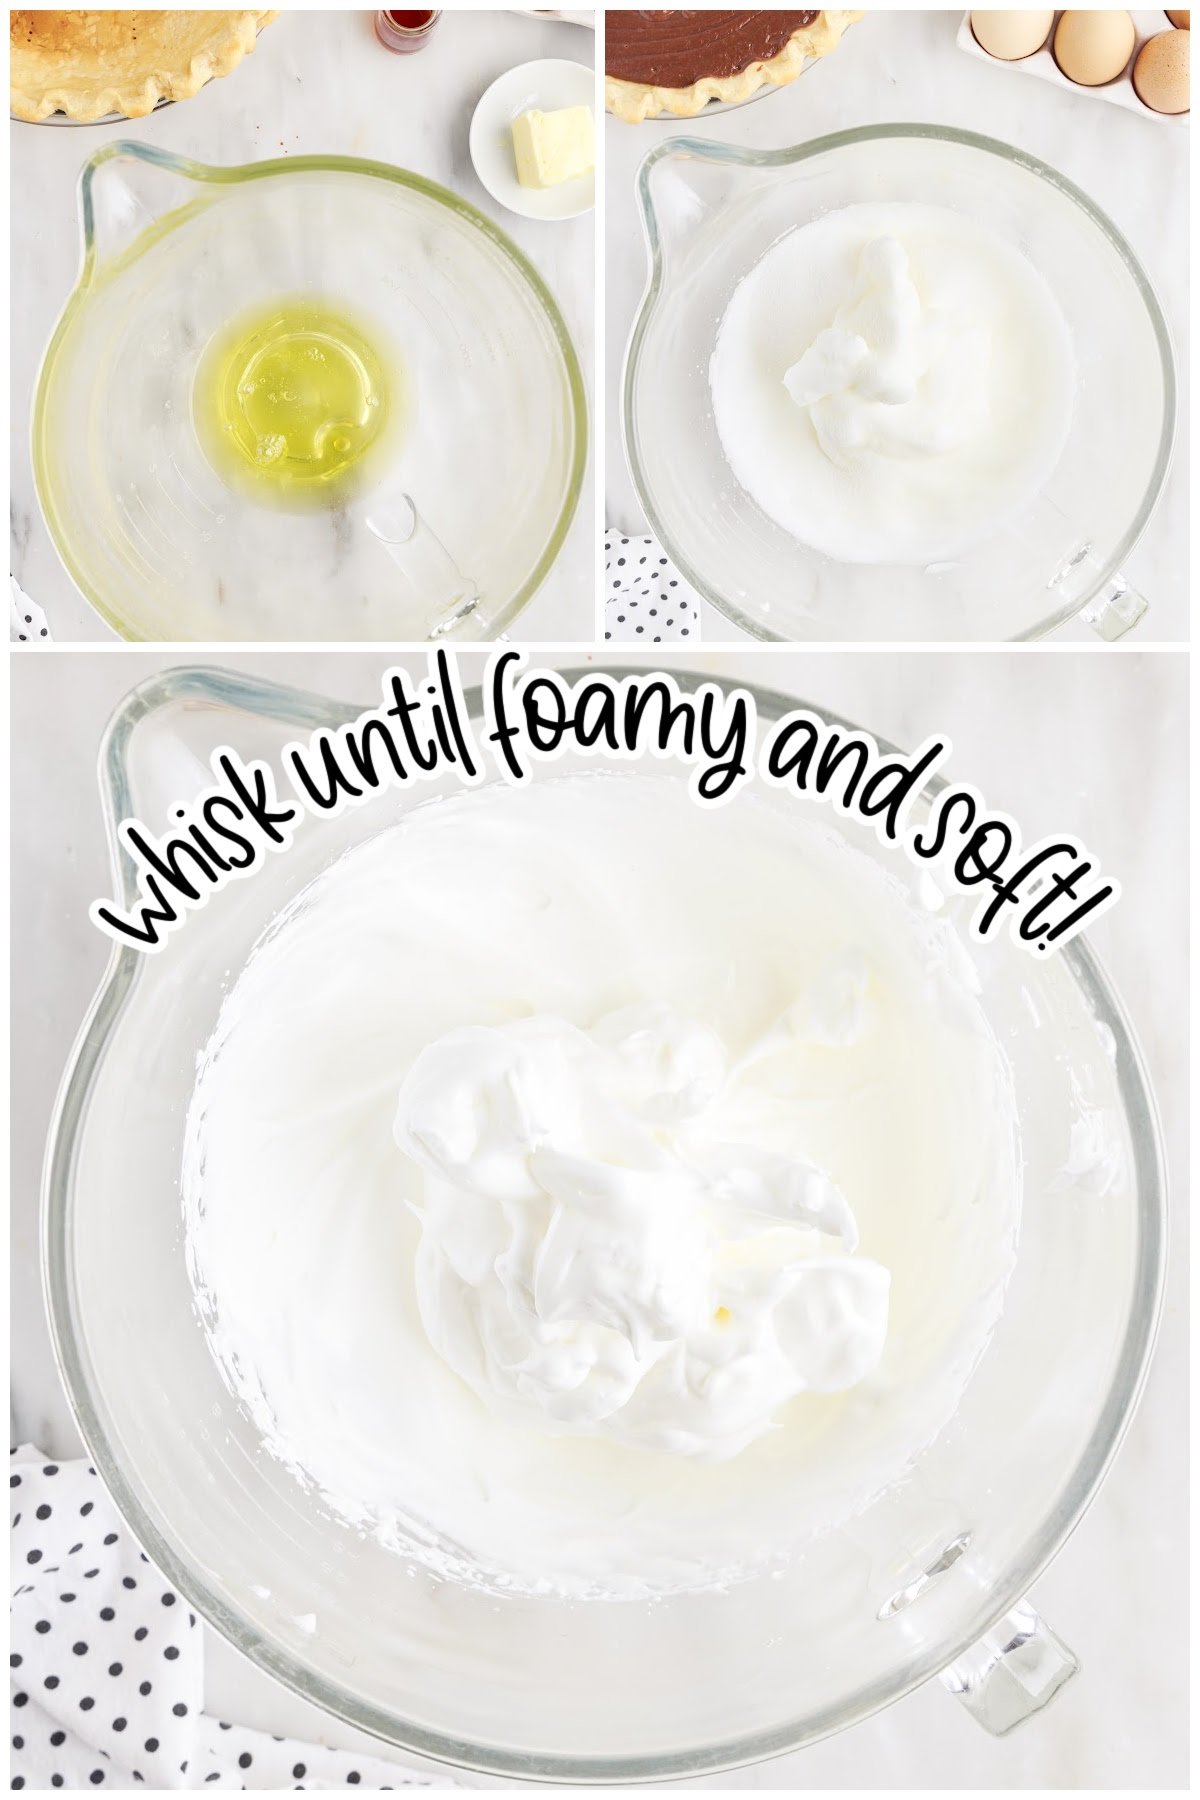 In a large bowl, mix egg whites until foamy and soft.  Ad in the sugar and cream of tartar until stiff peaks form.